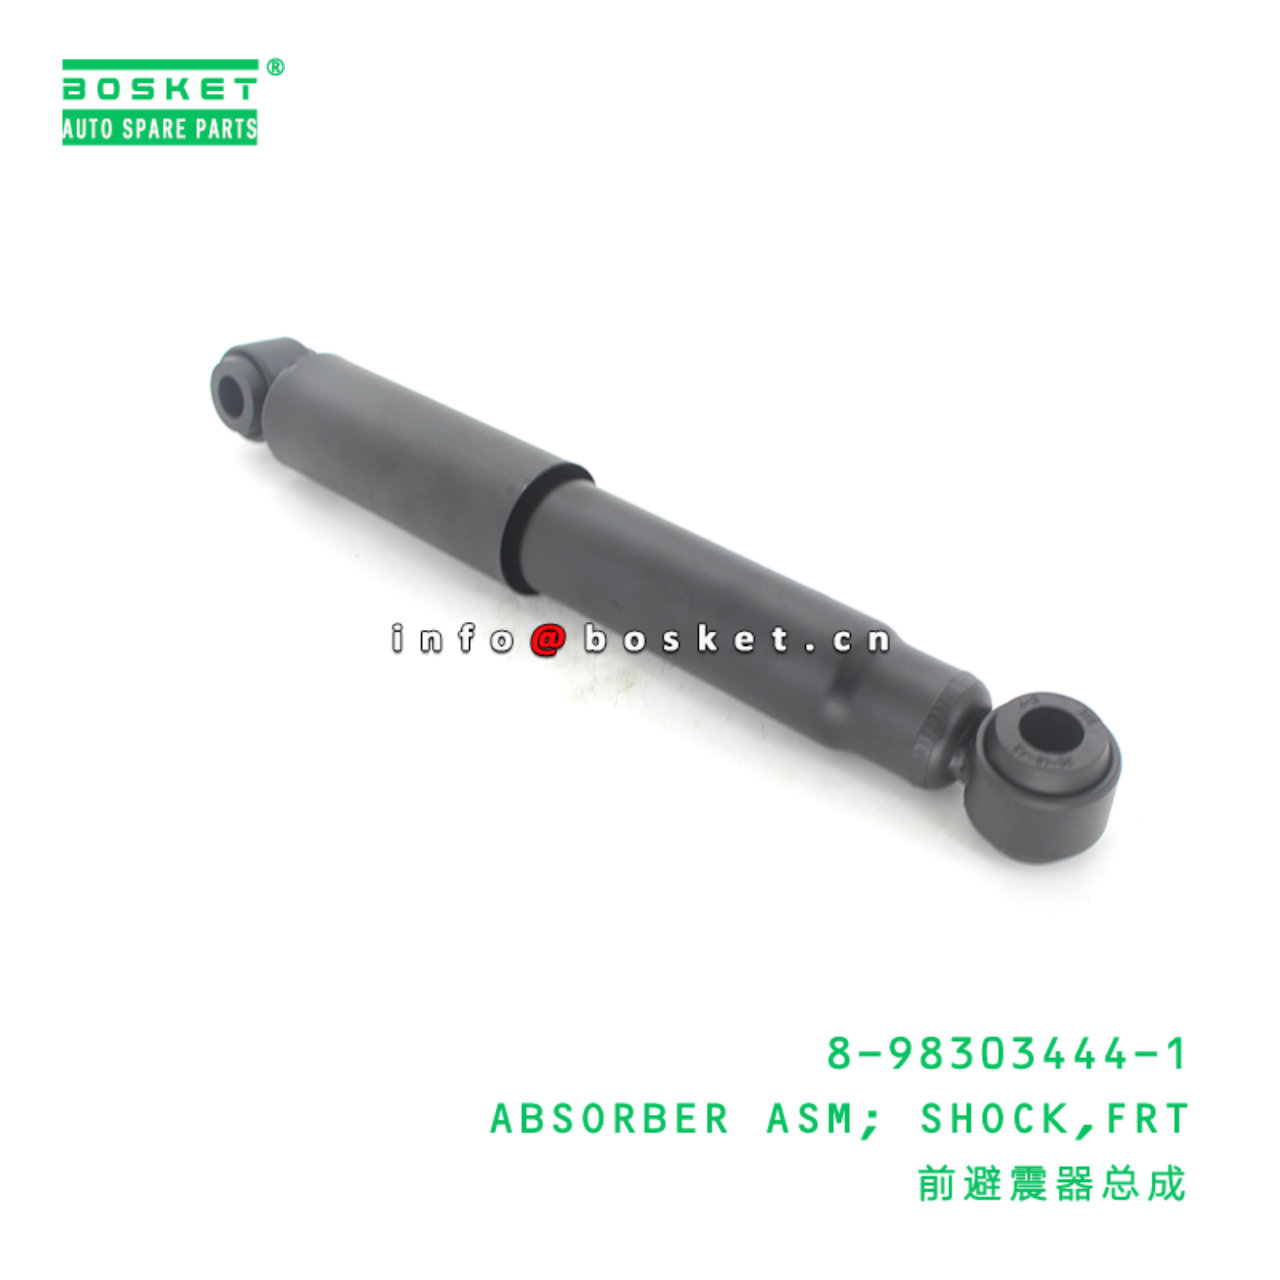 8-98303444-1 Front Shock Absorber Assembly Suitable for ISUZU NPR 8983034441